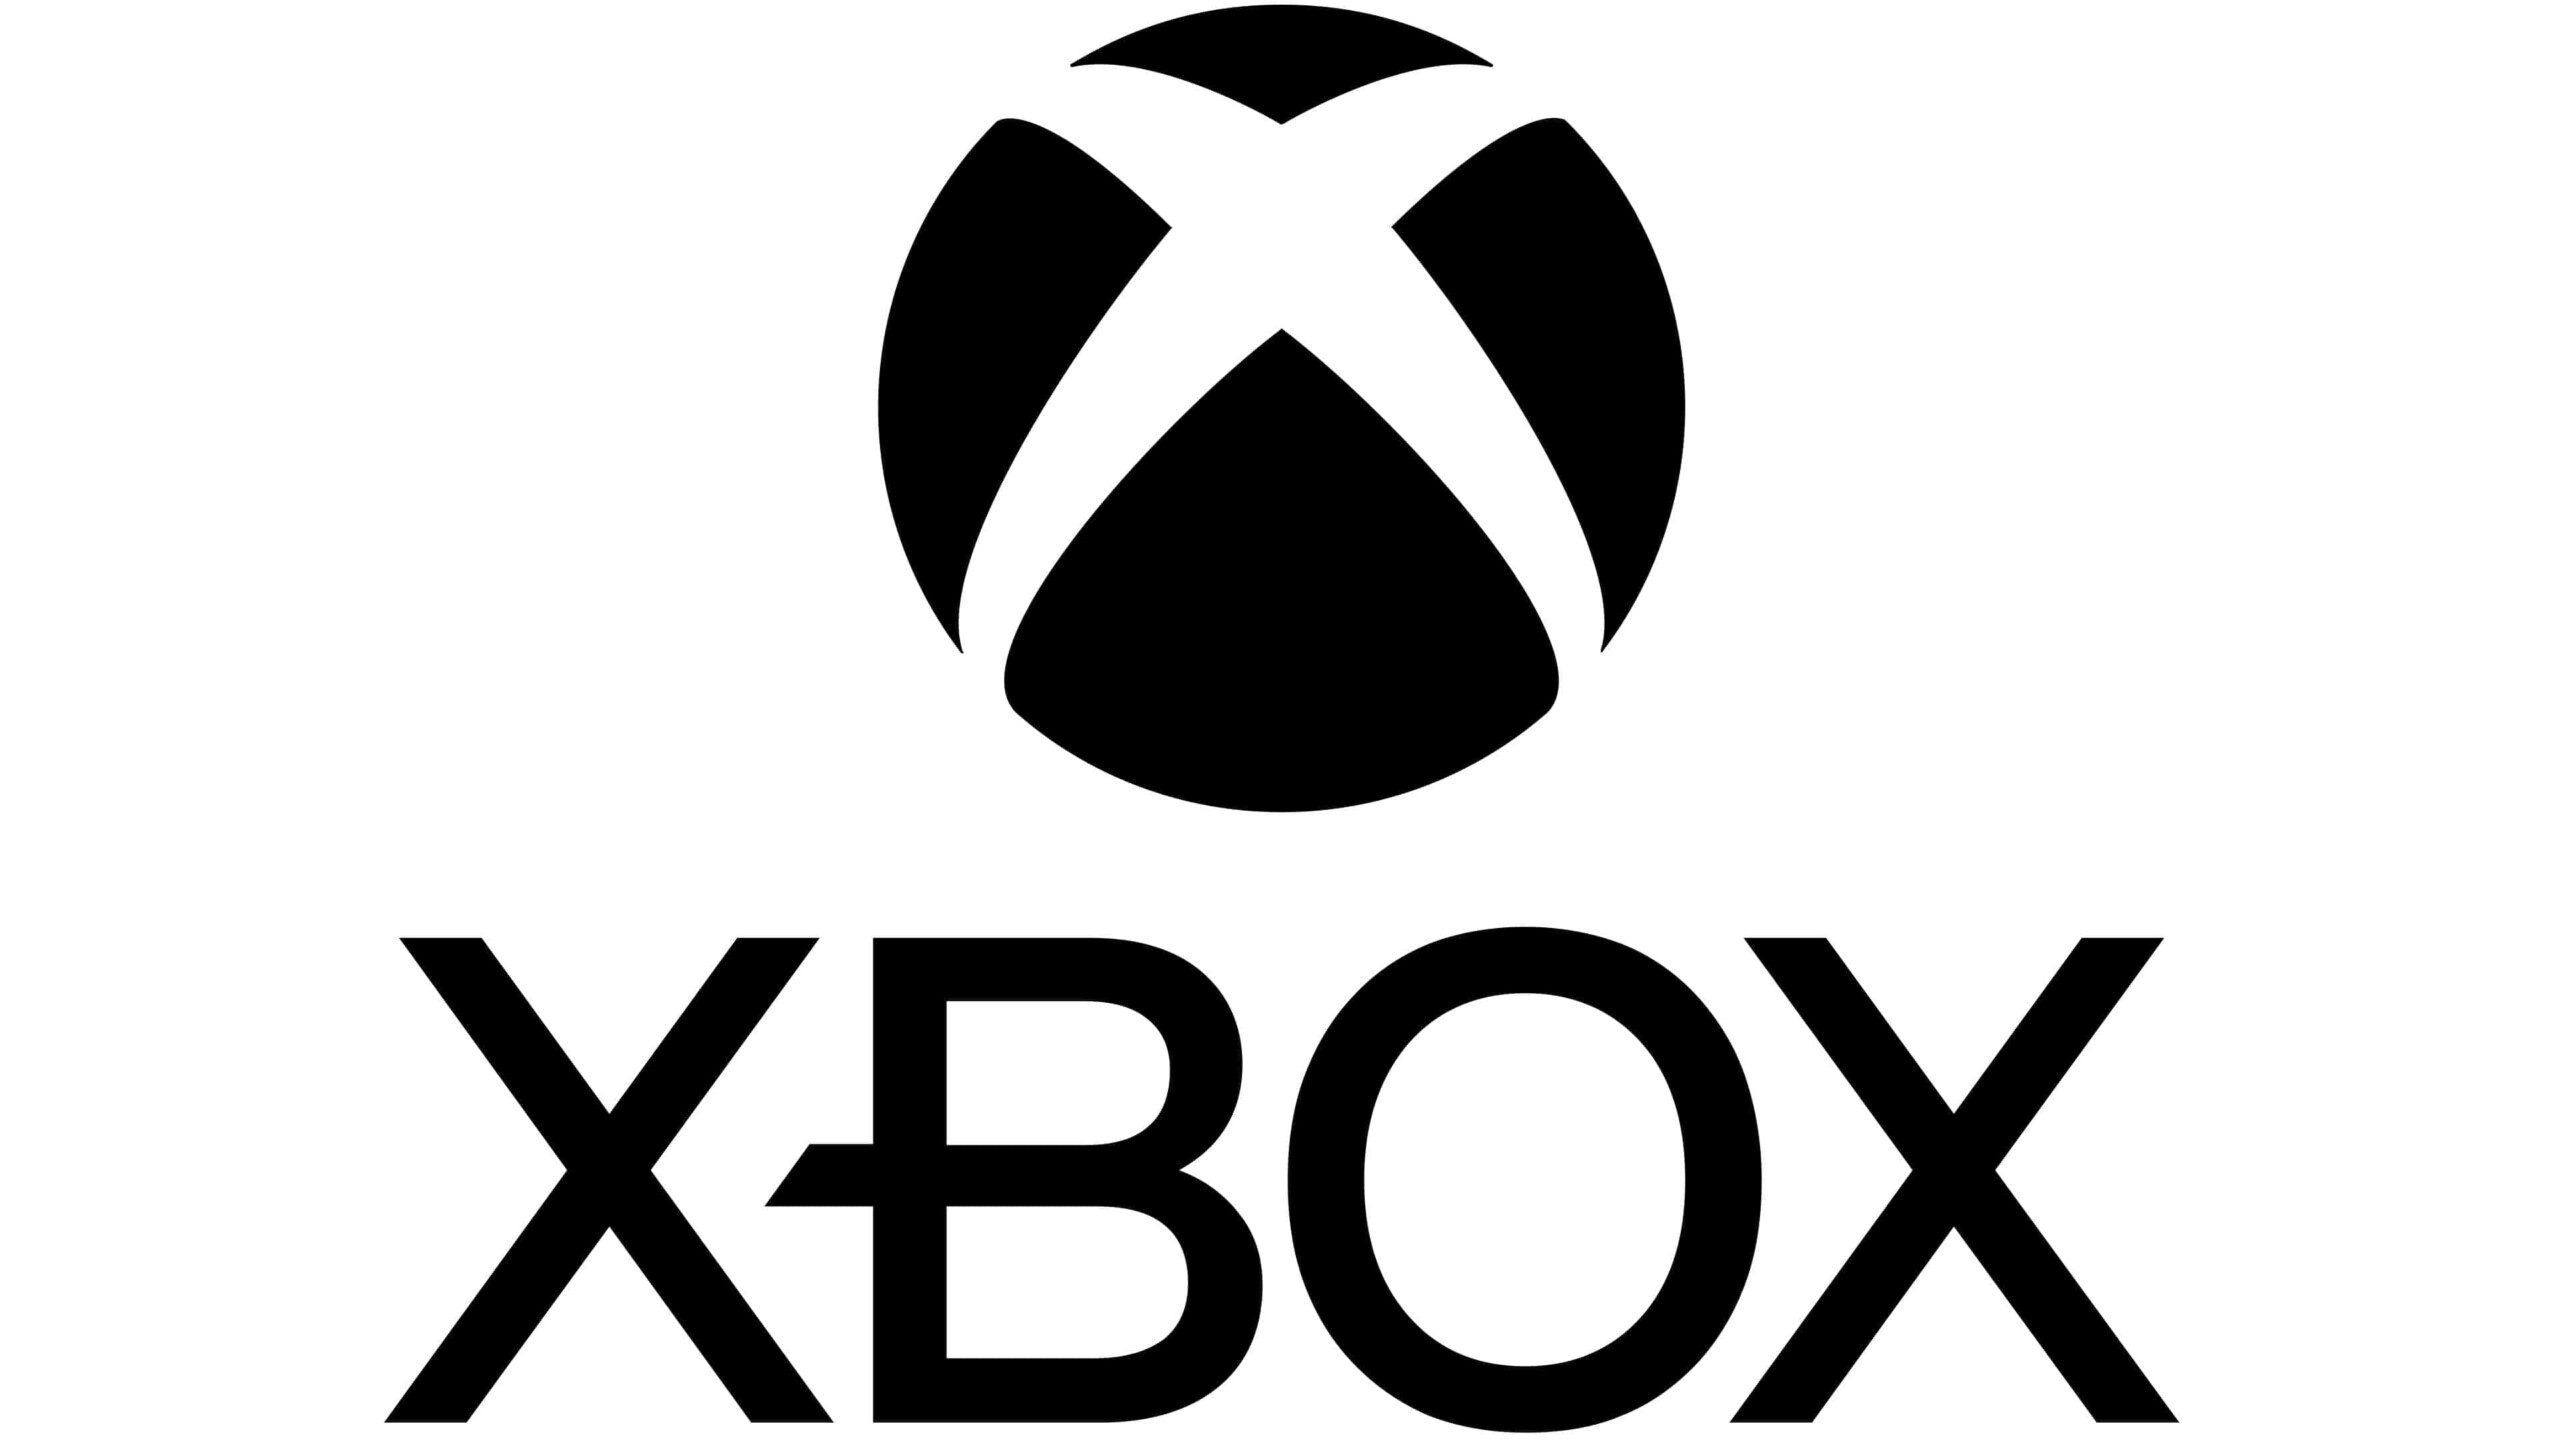 Rumors Of An Xbox Portable At Upcoming Xbox Games Showcase; Shadow Drop Of New Game Alongside It